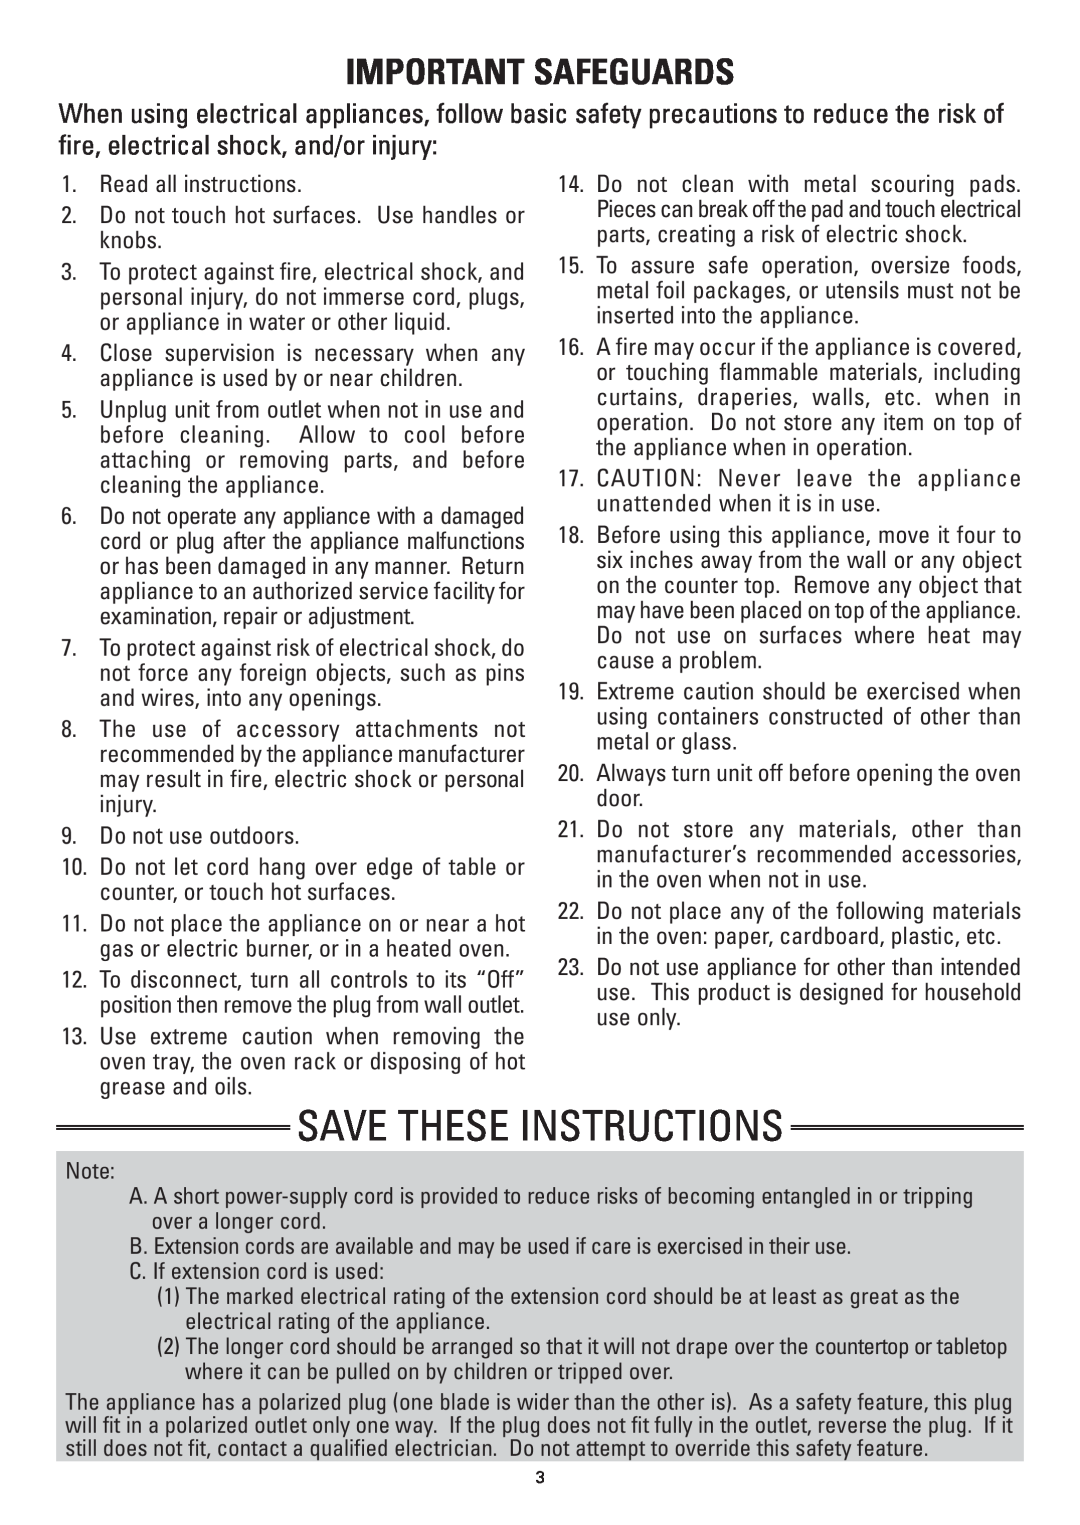 Sanyo SK-VF7S instruction manual Save These Instructions, Important Safeguards 